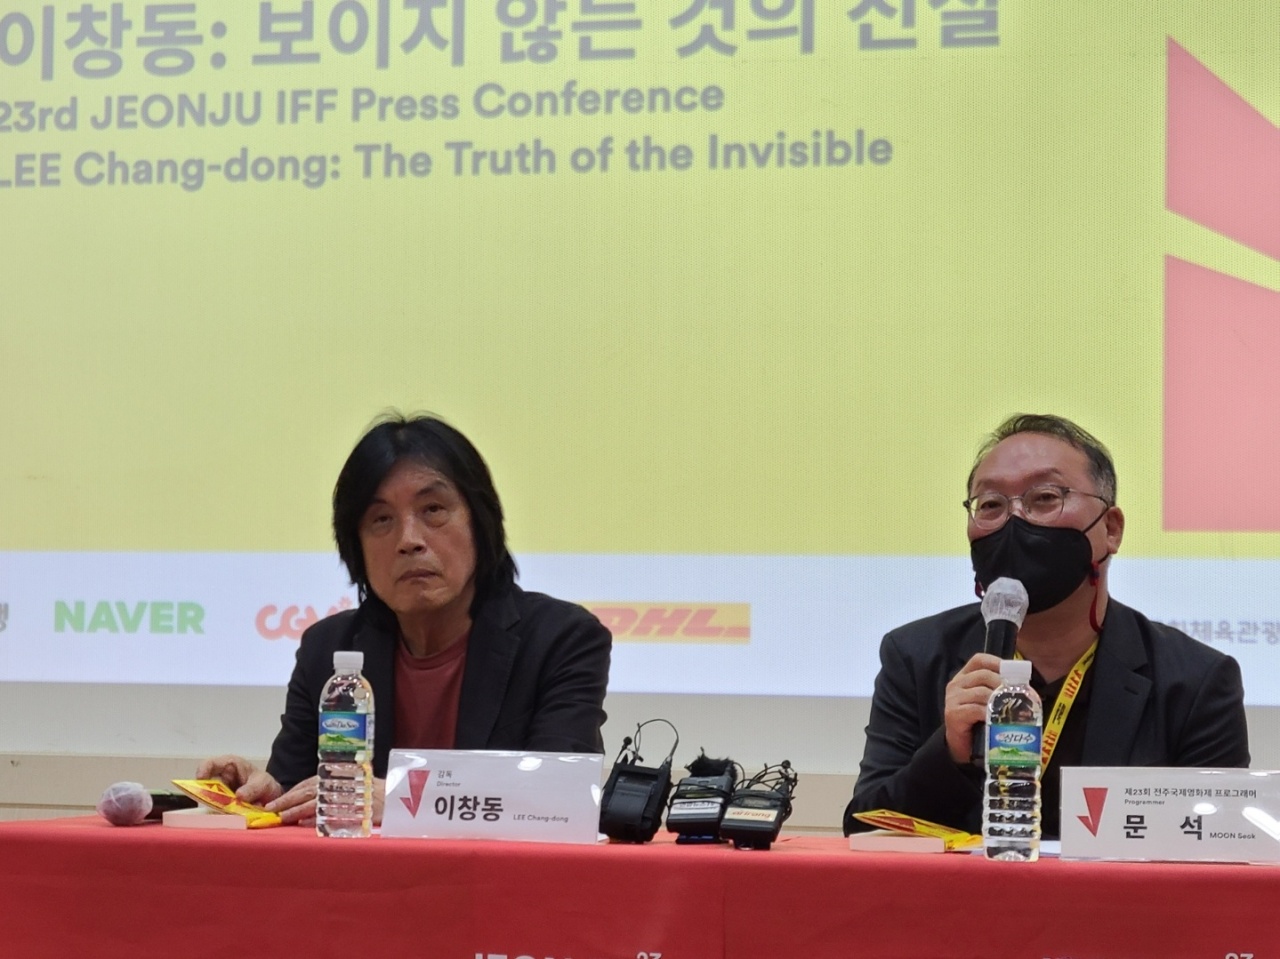 From left: Director Lee Chang-dong and Jeonju International Film Festival co-programmer Moon Seok talk during a press conference held at Jeonju Jungbu Vision Center in Jeonju, North Jeolla Province. (Song Seung-hyun/The Korea Herald)